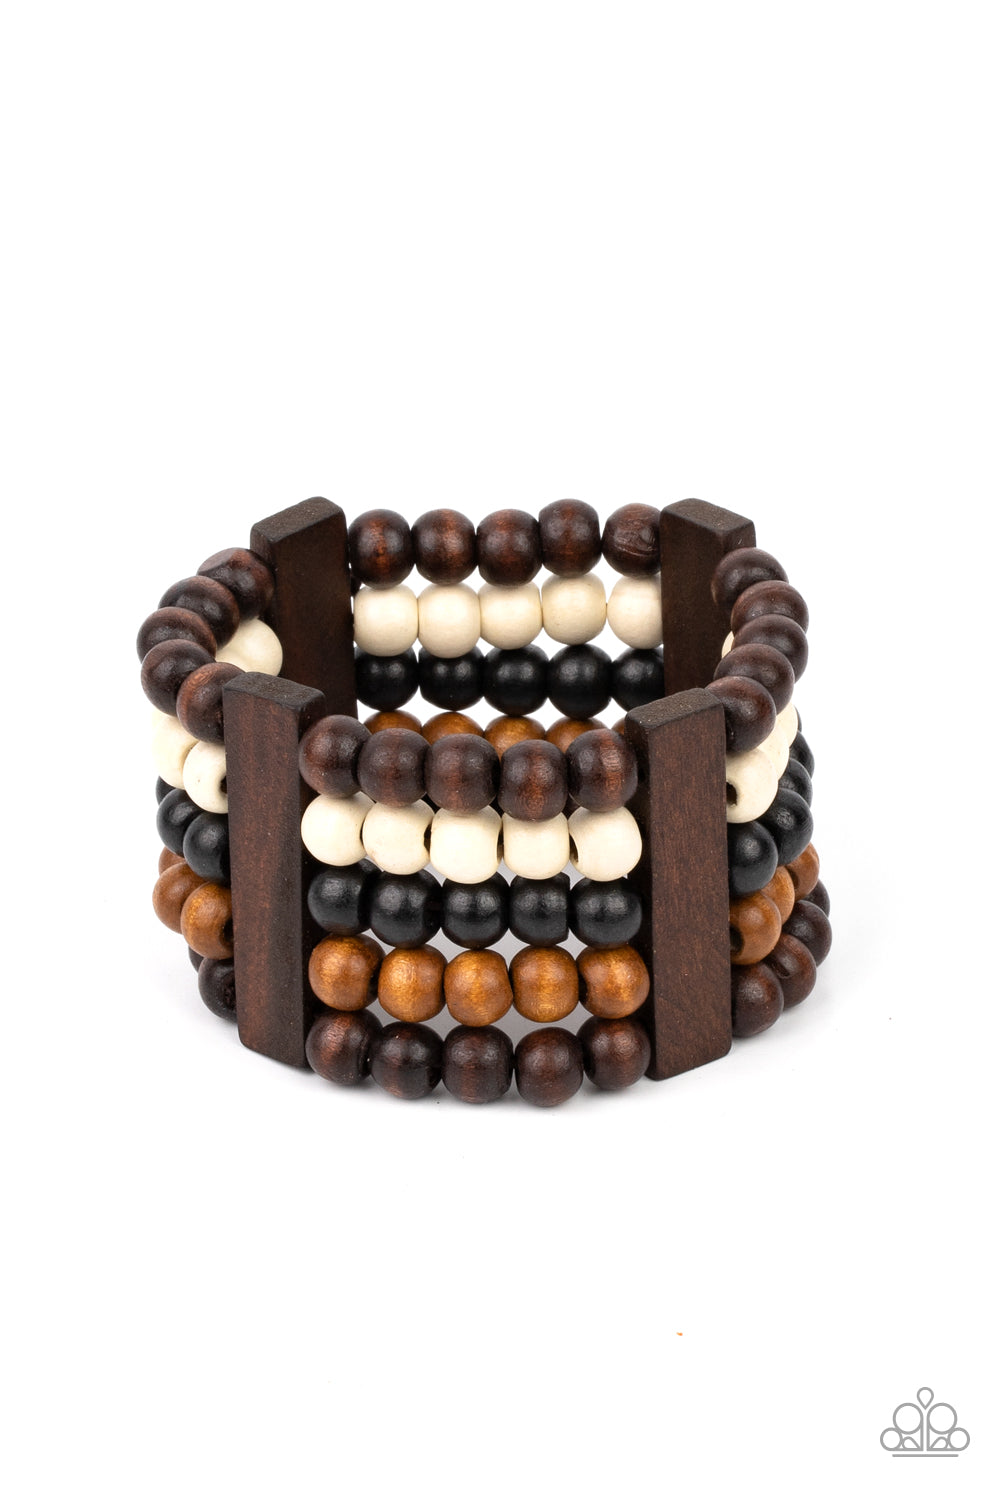 Paparazzi Accessories brown bracelet - Held in place by rectangular wooden frames, strands of brown, black, and white wooden beads are threaded along stretchy bands around the wrist for a colorfully tropical look.